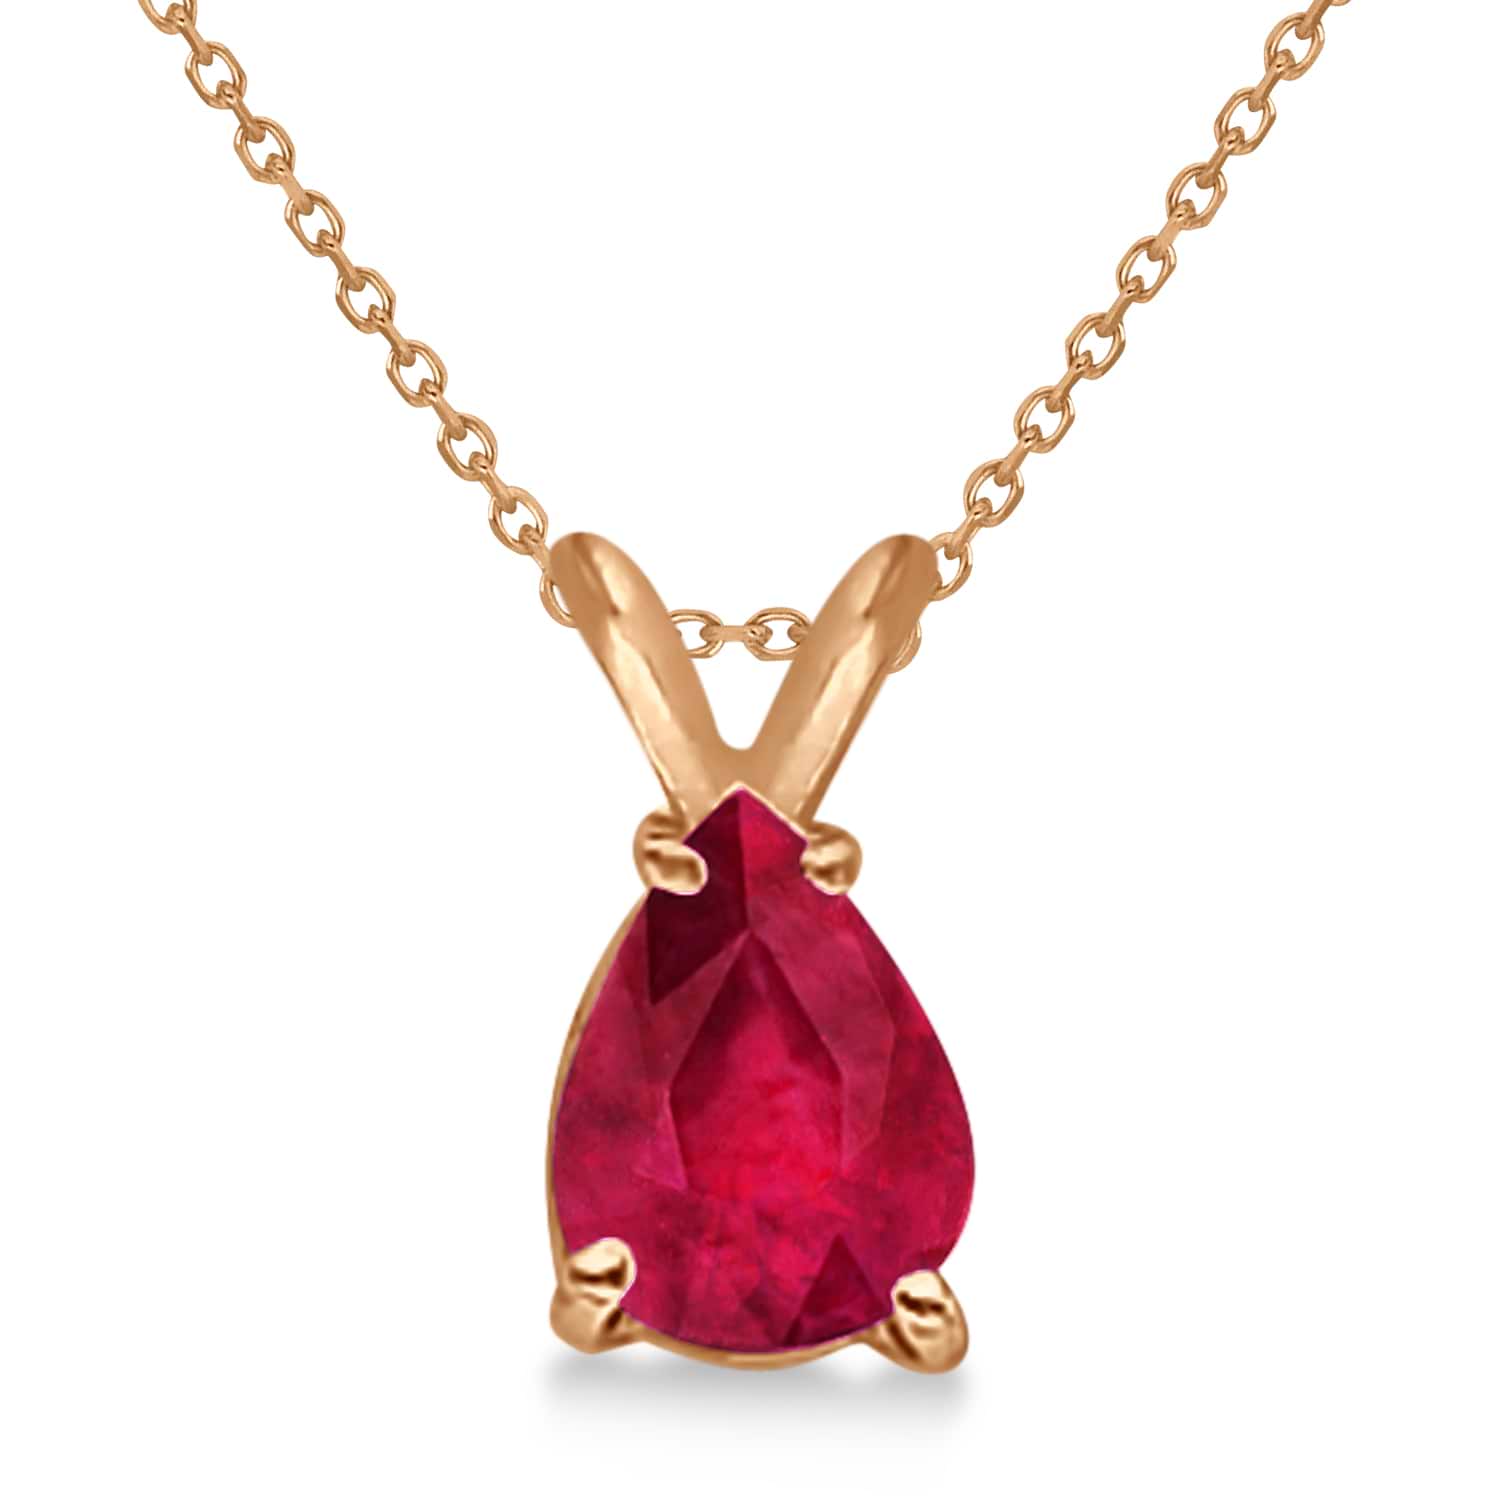 Pear Cut Ruby Solitaire Pendant Necklace 14K Rose Gold (0.75ct)